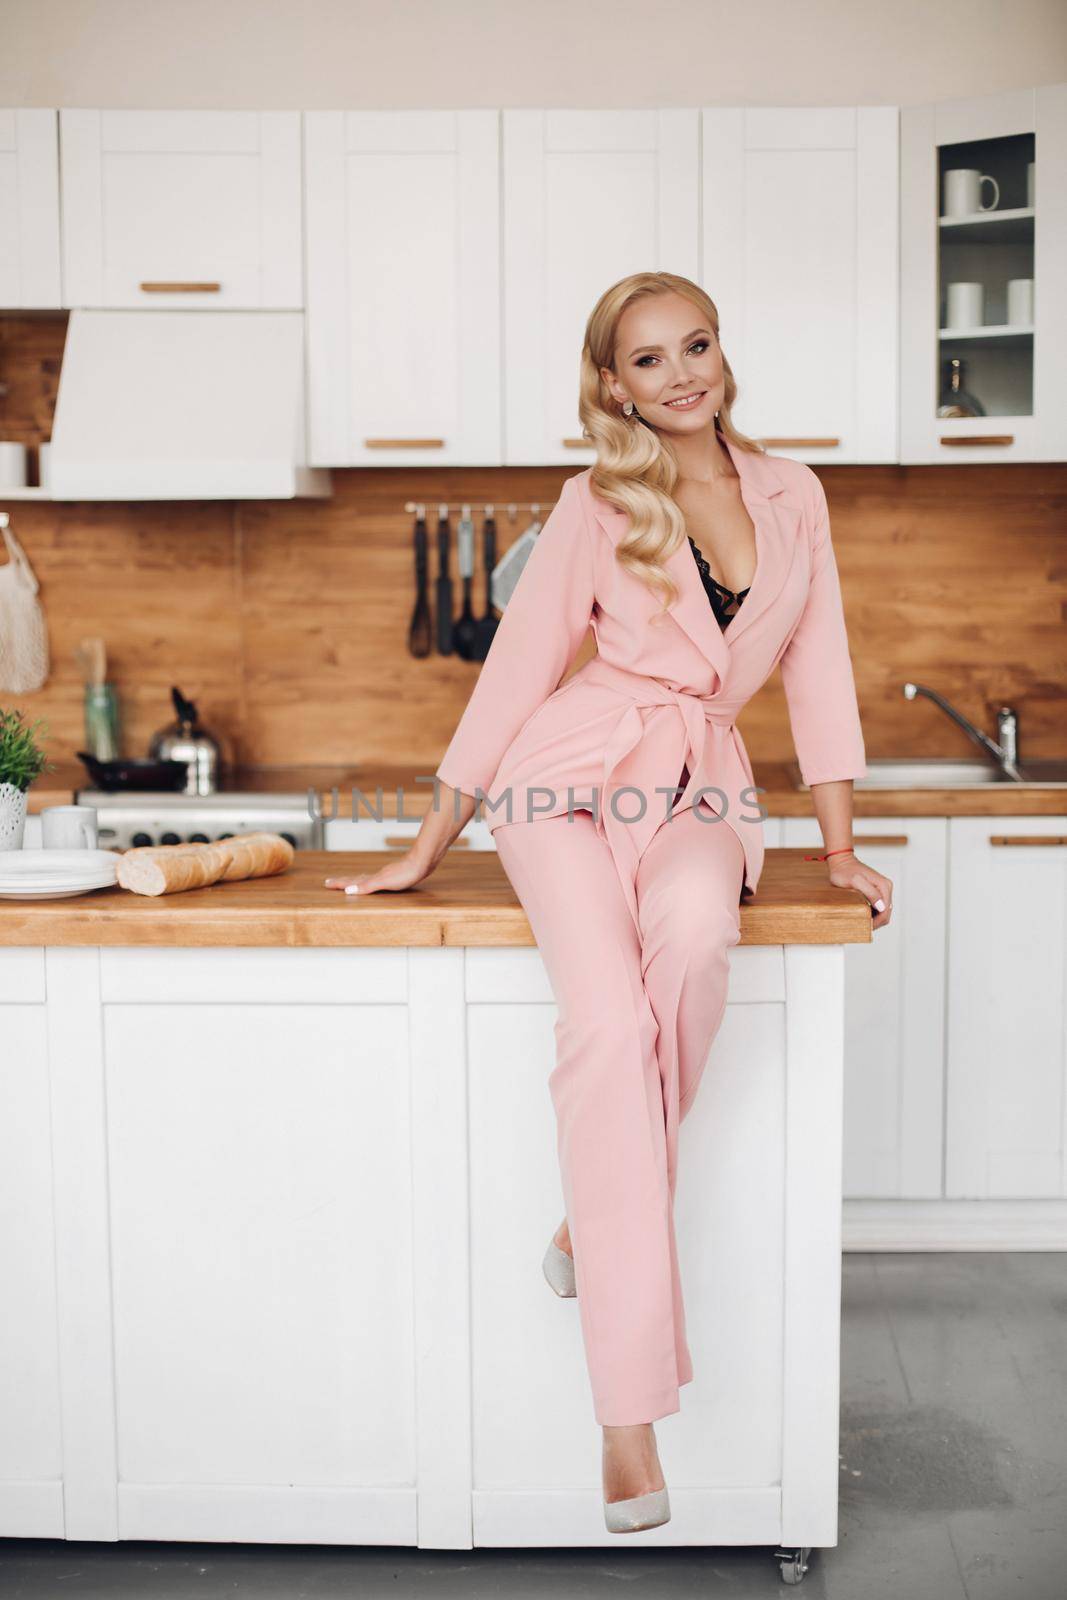 Stylish elegant attractive young blonde woman in pink suit with trousers and high heels sitting with legs crossed on kitchen counter with baguette in her hand. She is smiling at camera happily.